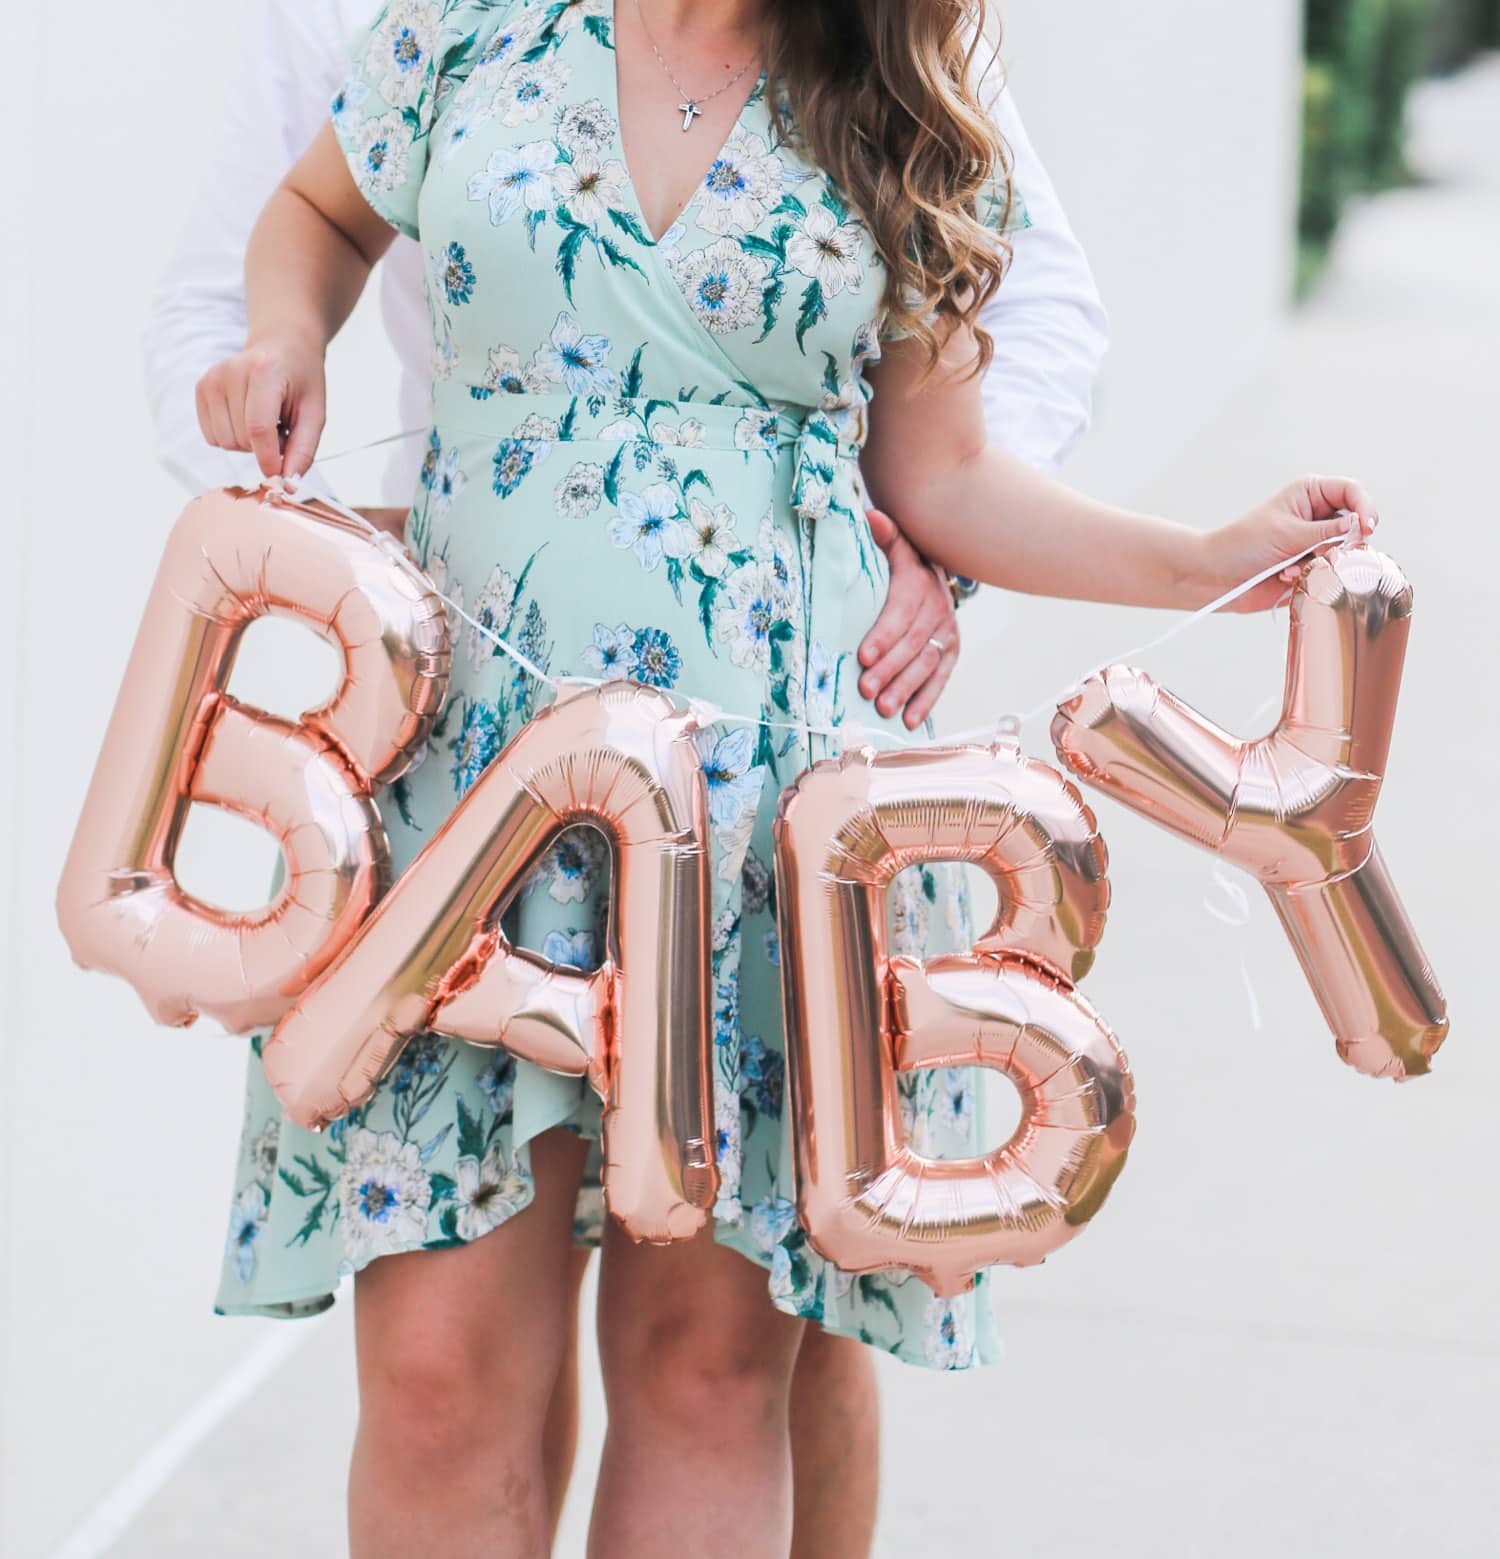 Cute pregnancy announcement photo idea | Rose gold Oh Baby balloons | ASTR pale green floral wrap dress | Flattering maternity dress | Florida beauty and fashion blogger Ashley Brooke Nicholas